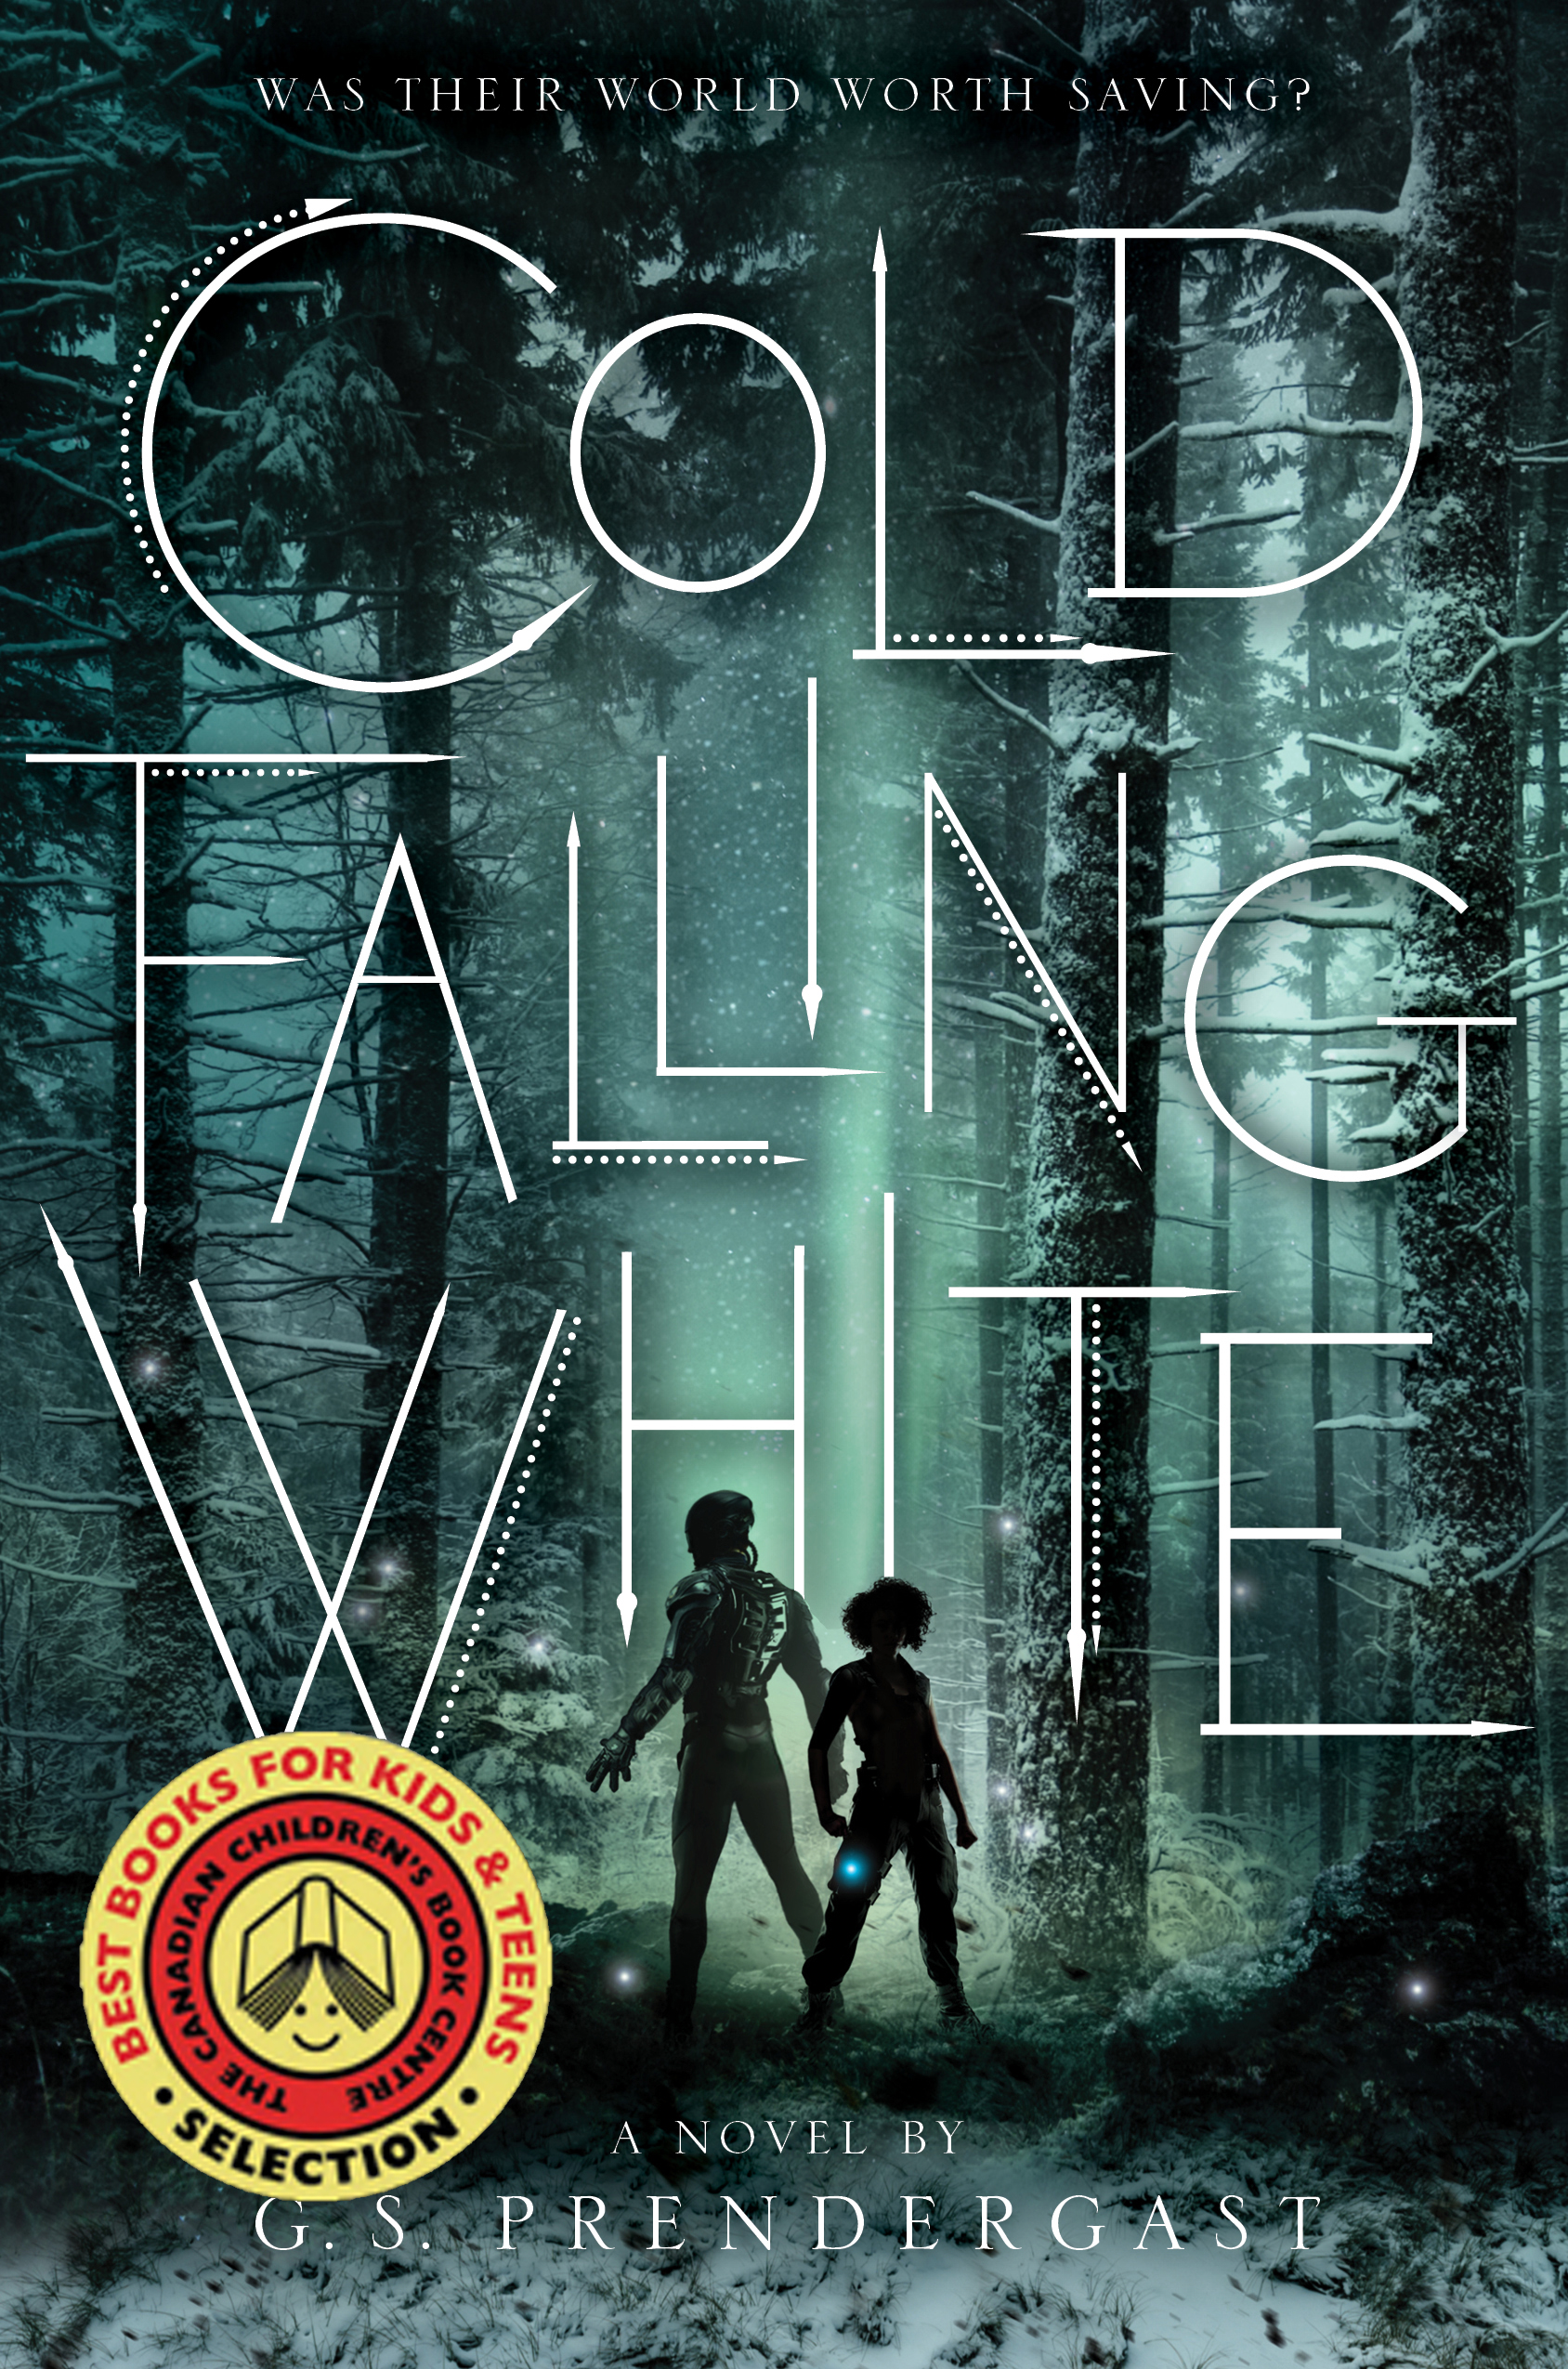 COLD FALLING WHITE Cover copy